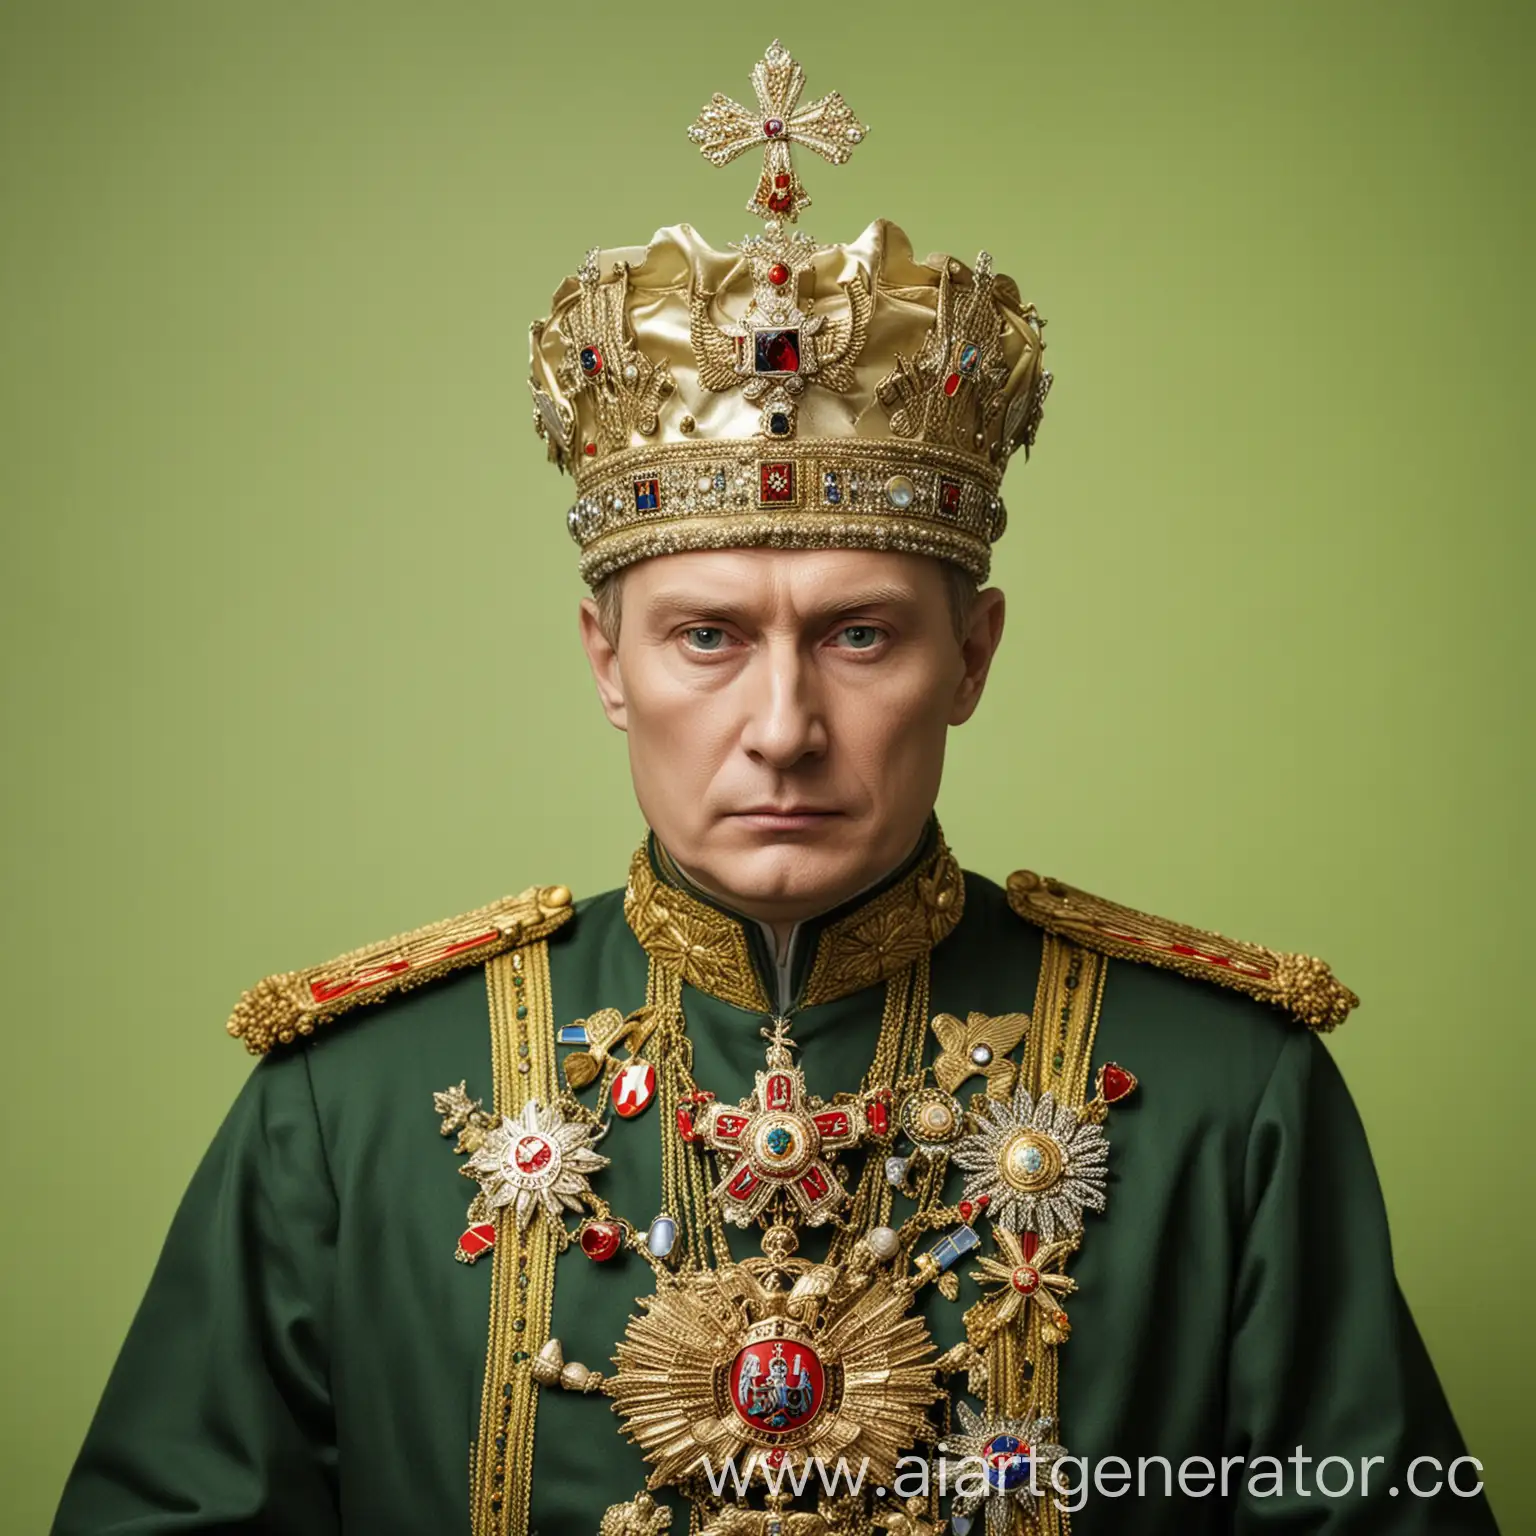 Modern-Emperor-of-Russia-on-Lime-Green-Background